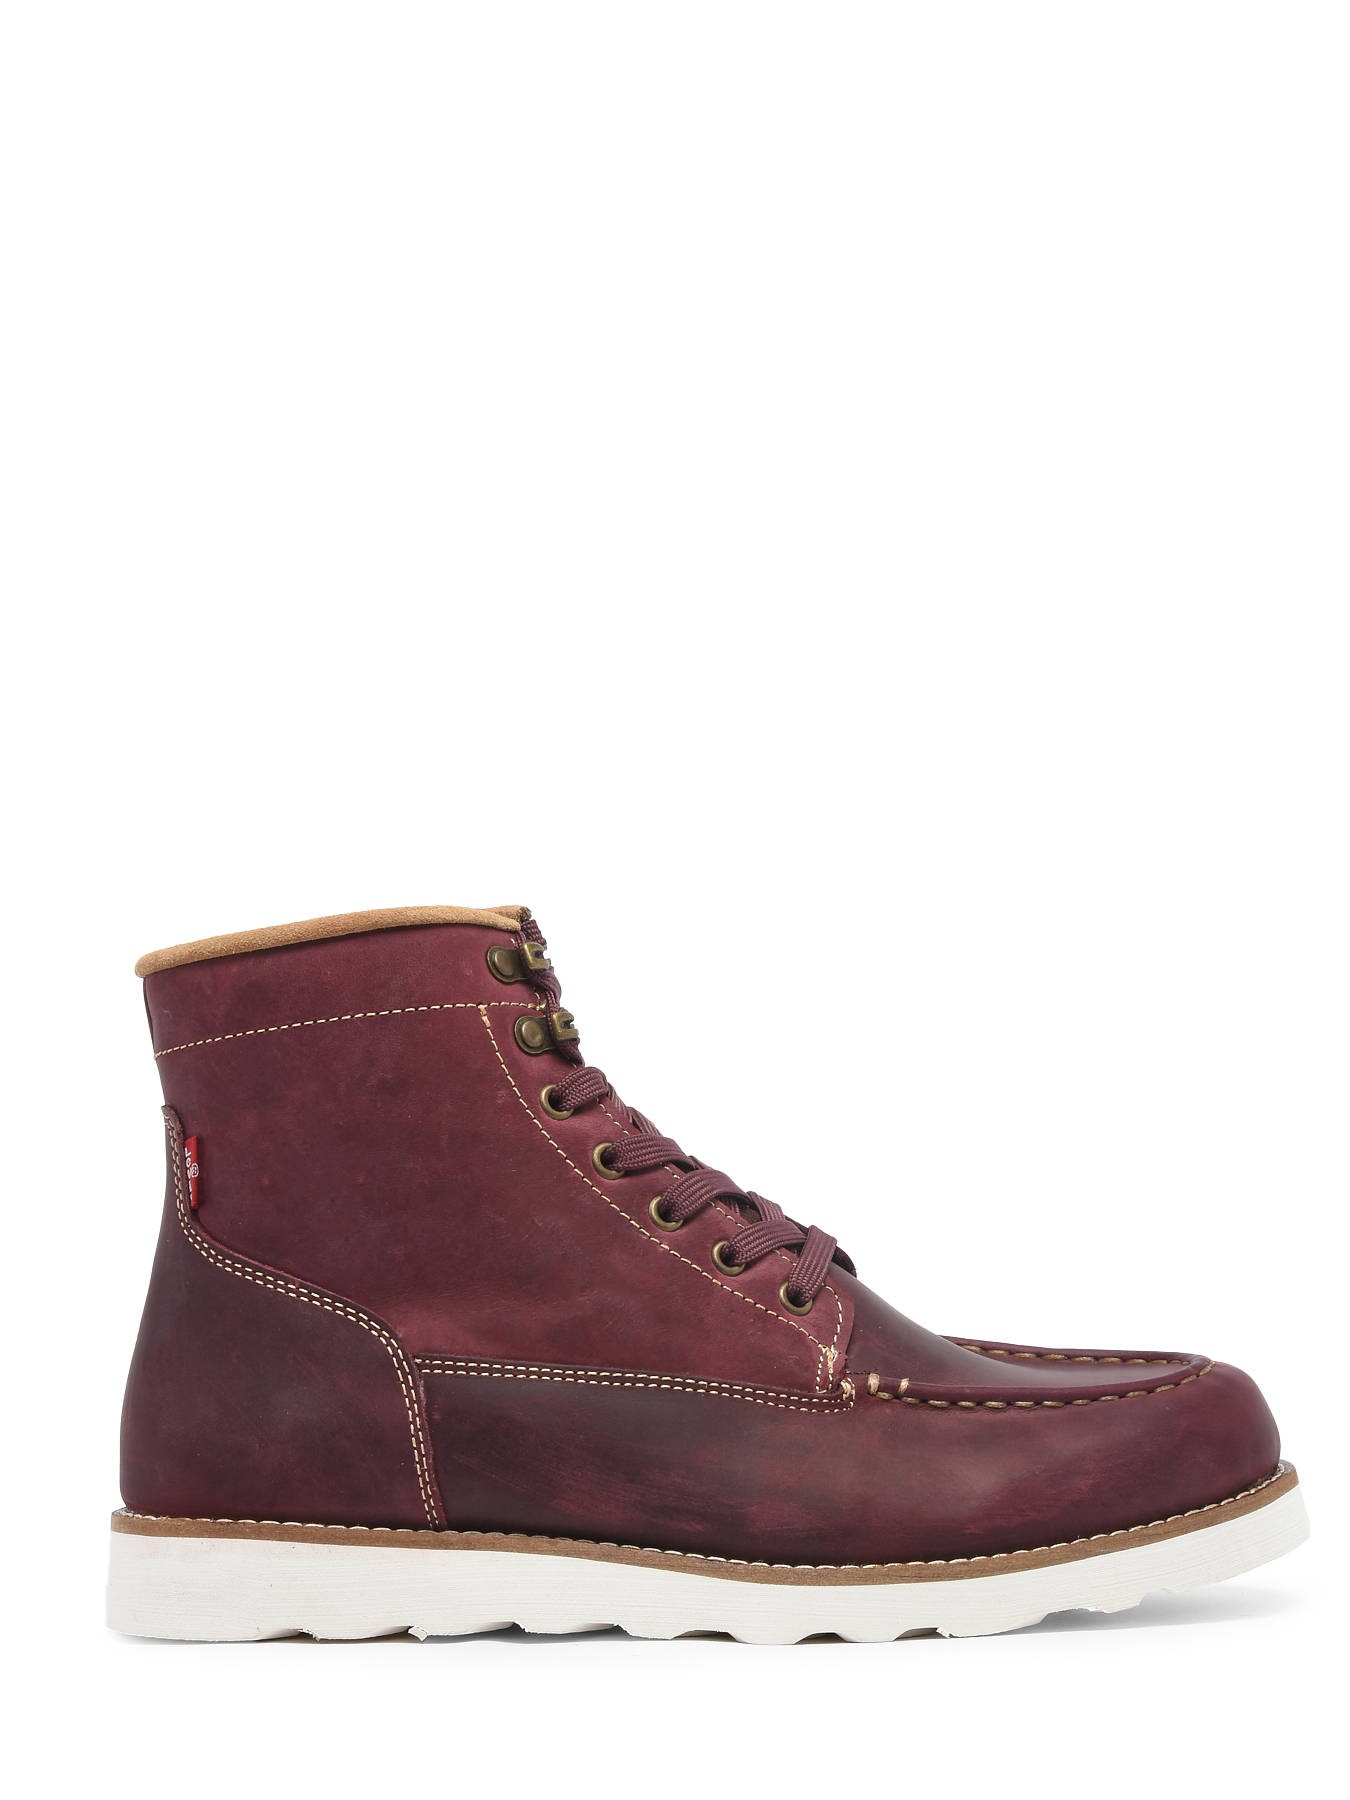 Levi's Boots DARROW MOCC - best prices